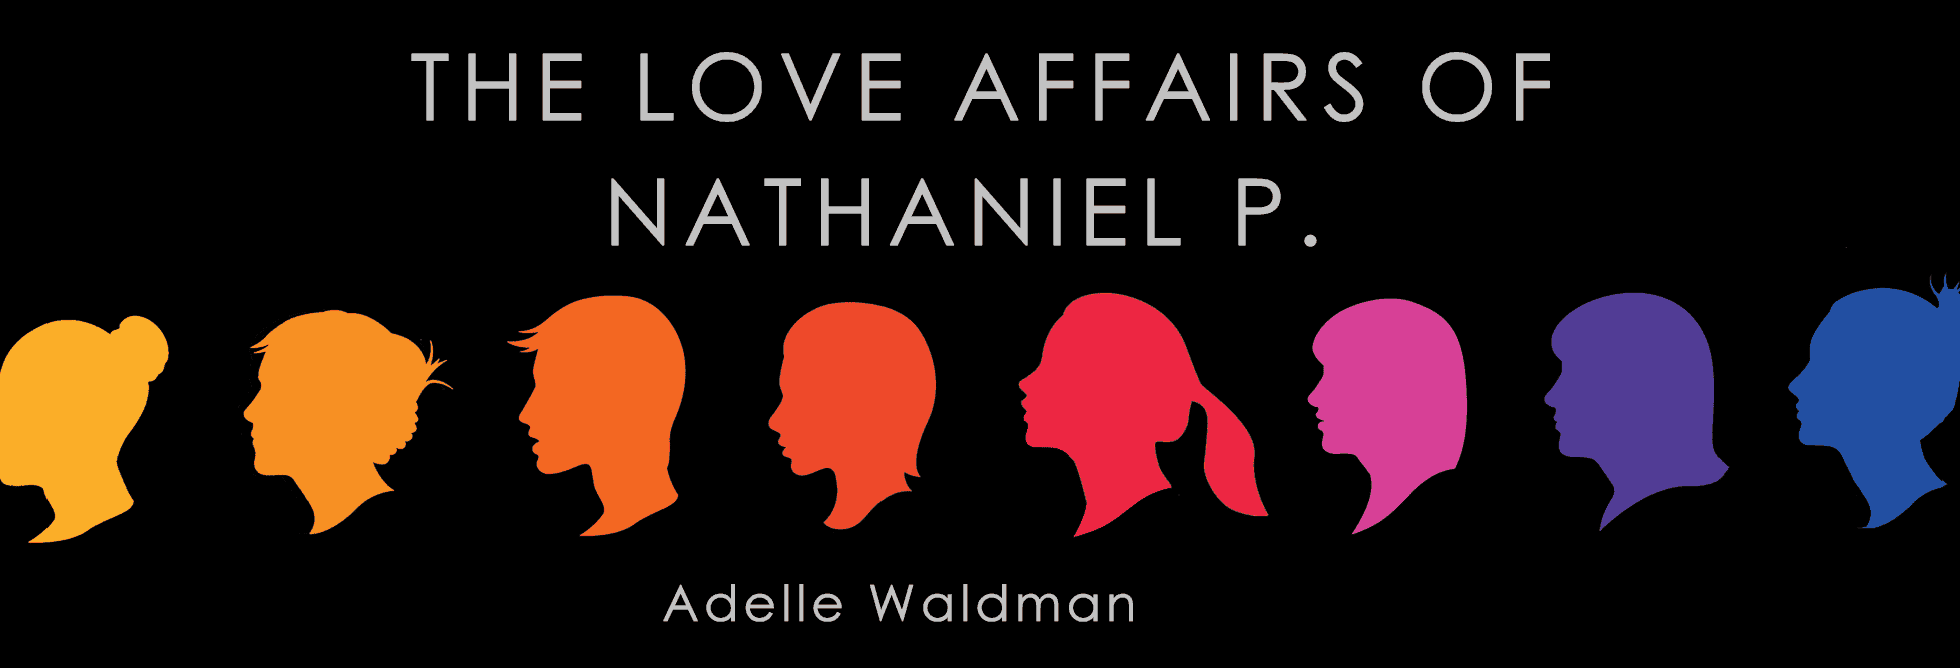 The Love Affairs of Nathaniel P by Adelle Waldman